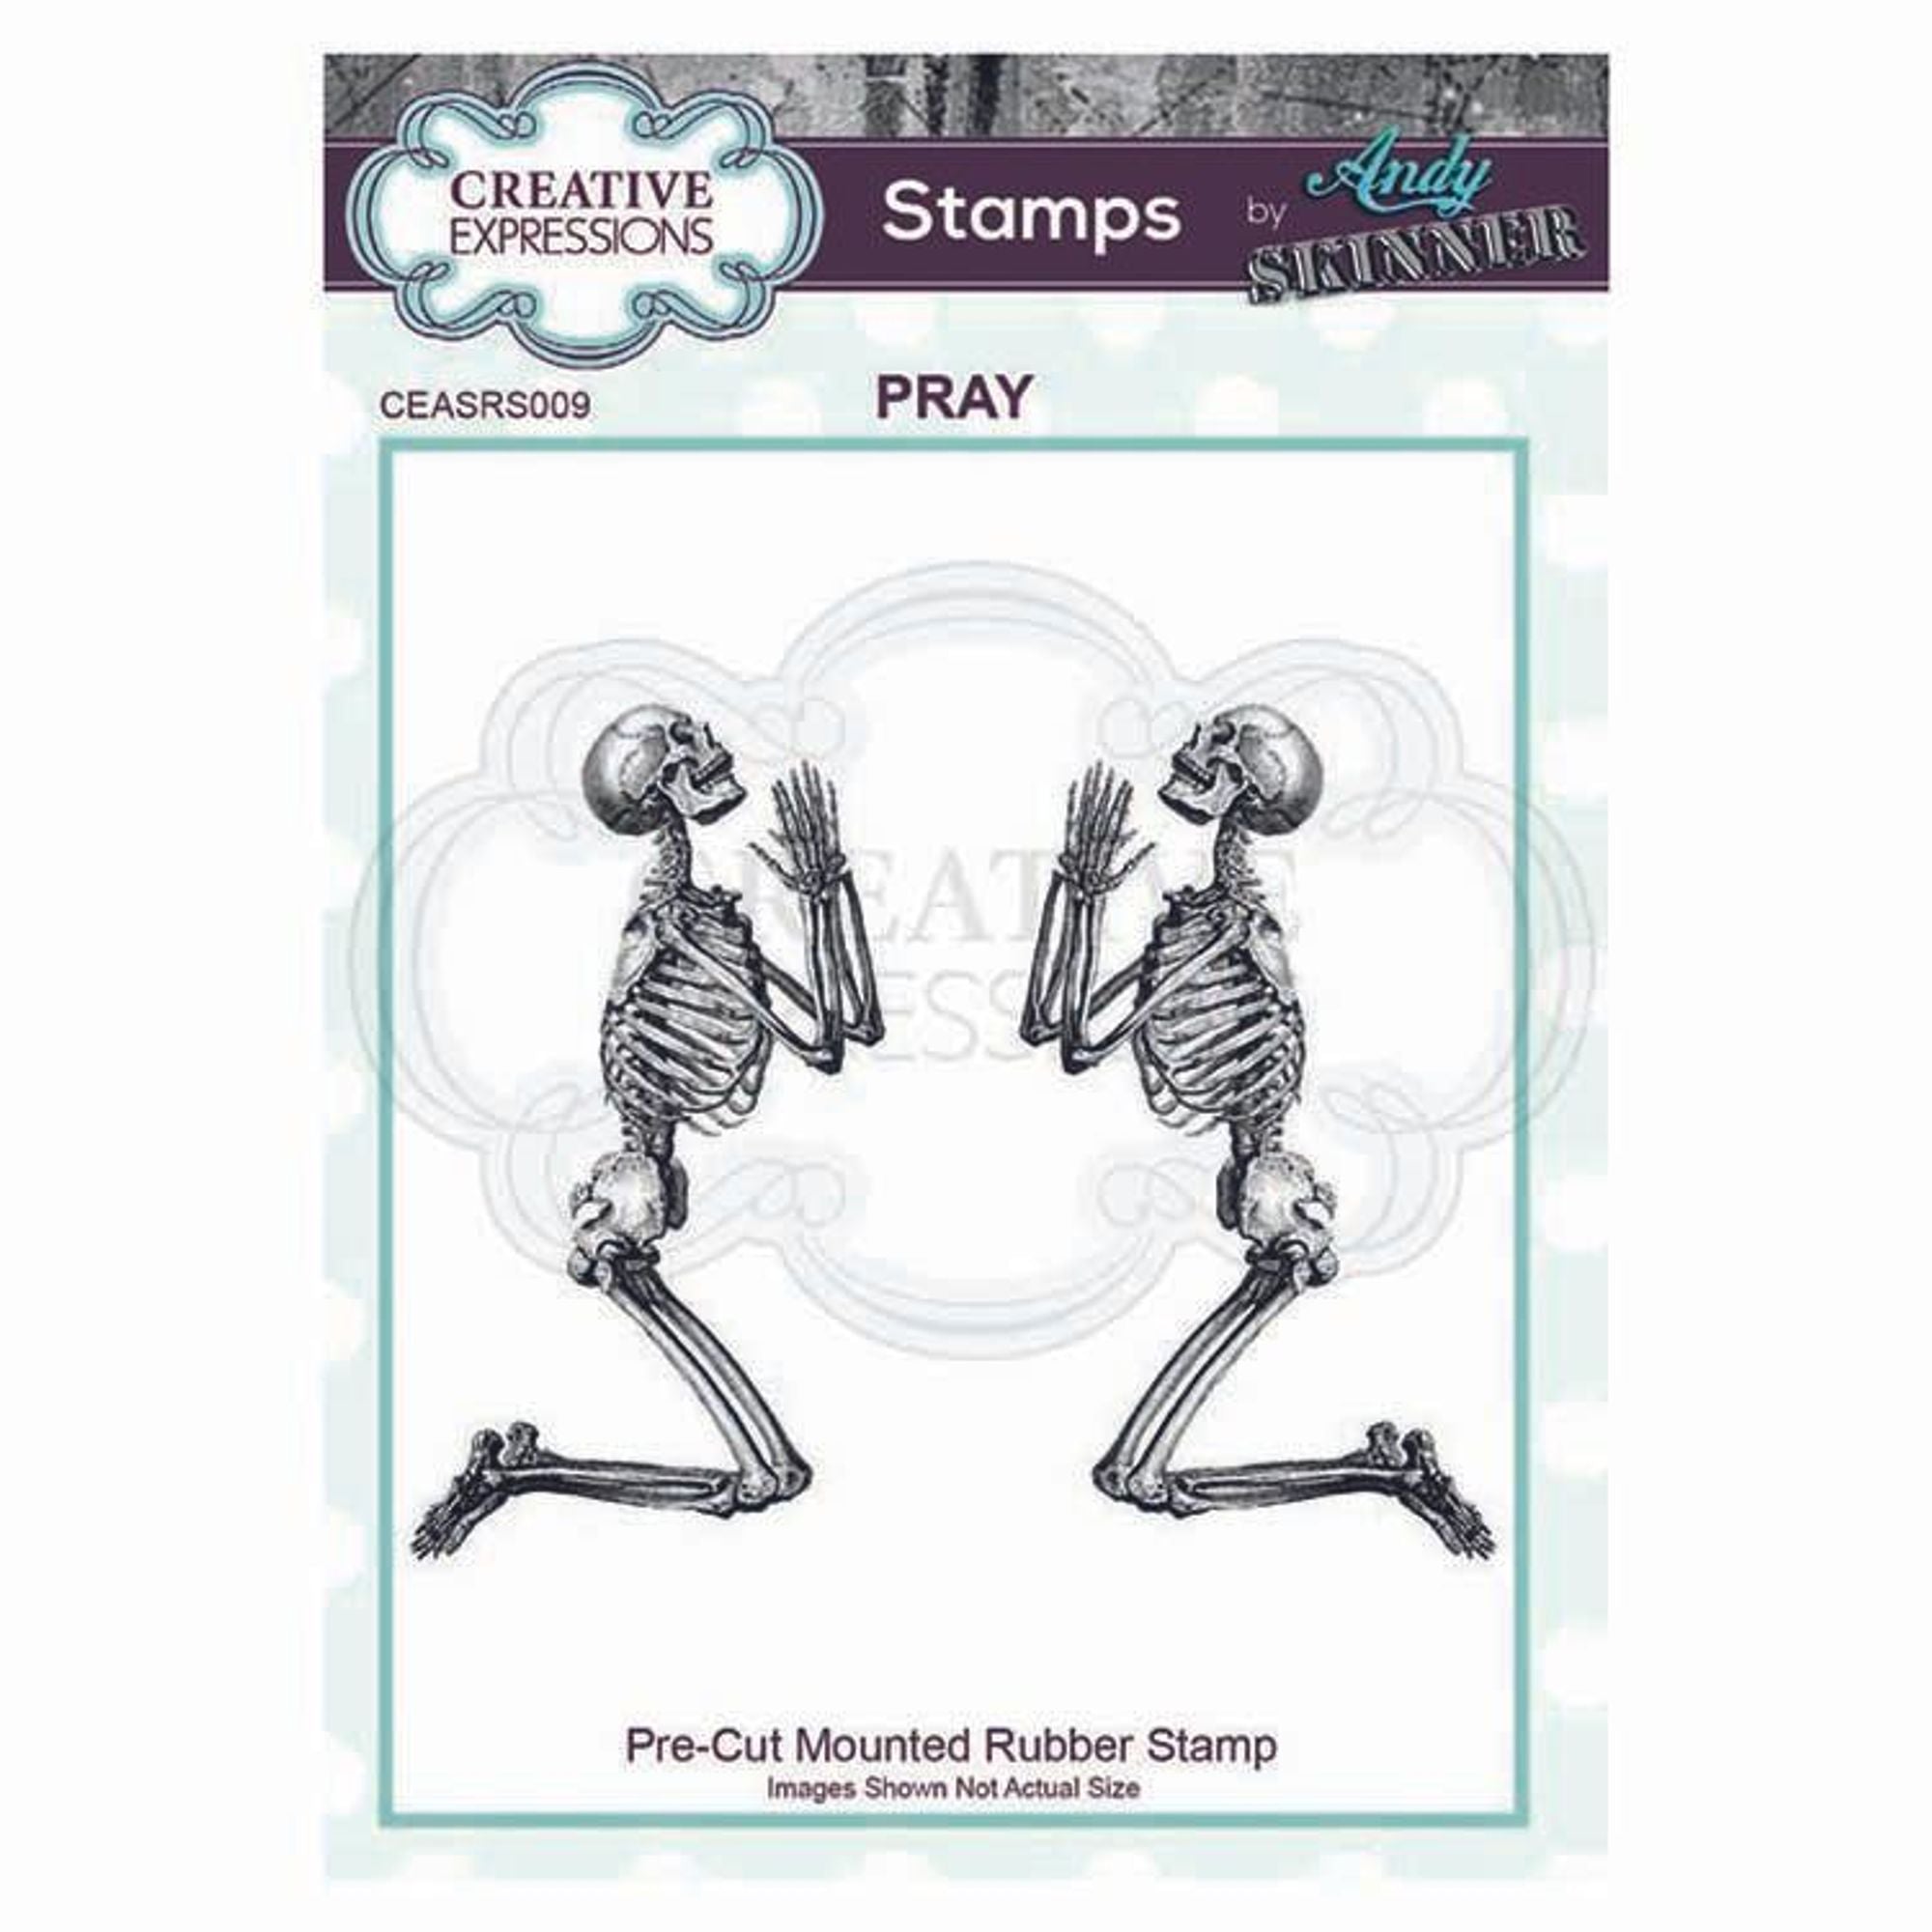 Creative Expressions  Pre Cut Rubber Stamp by Andy Skinner Pray